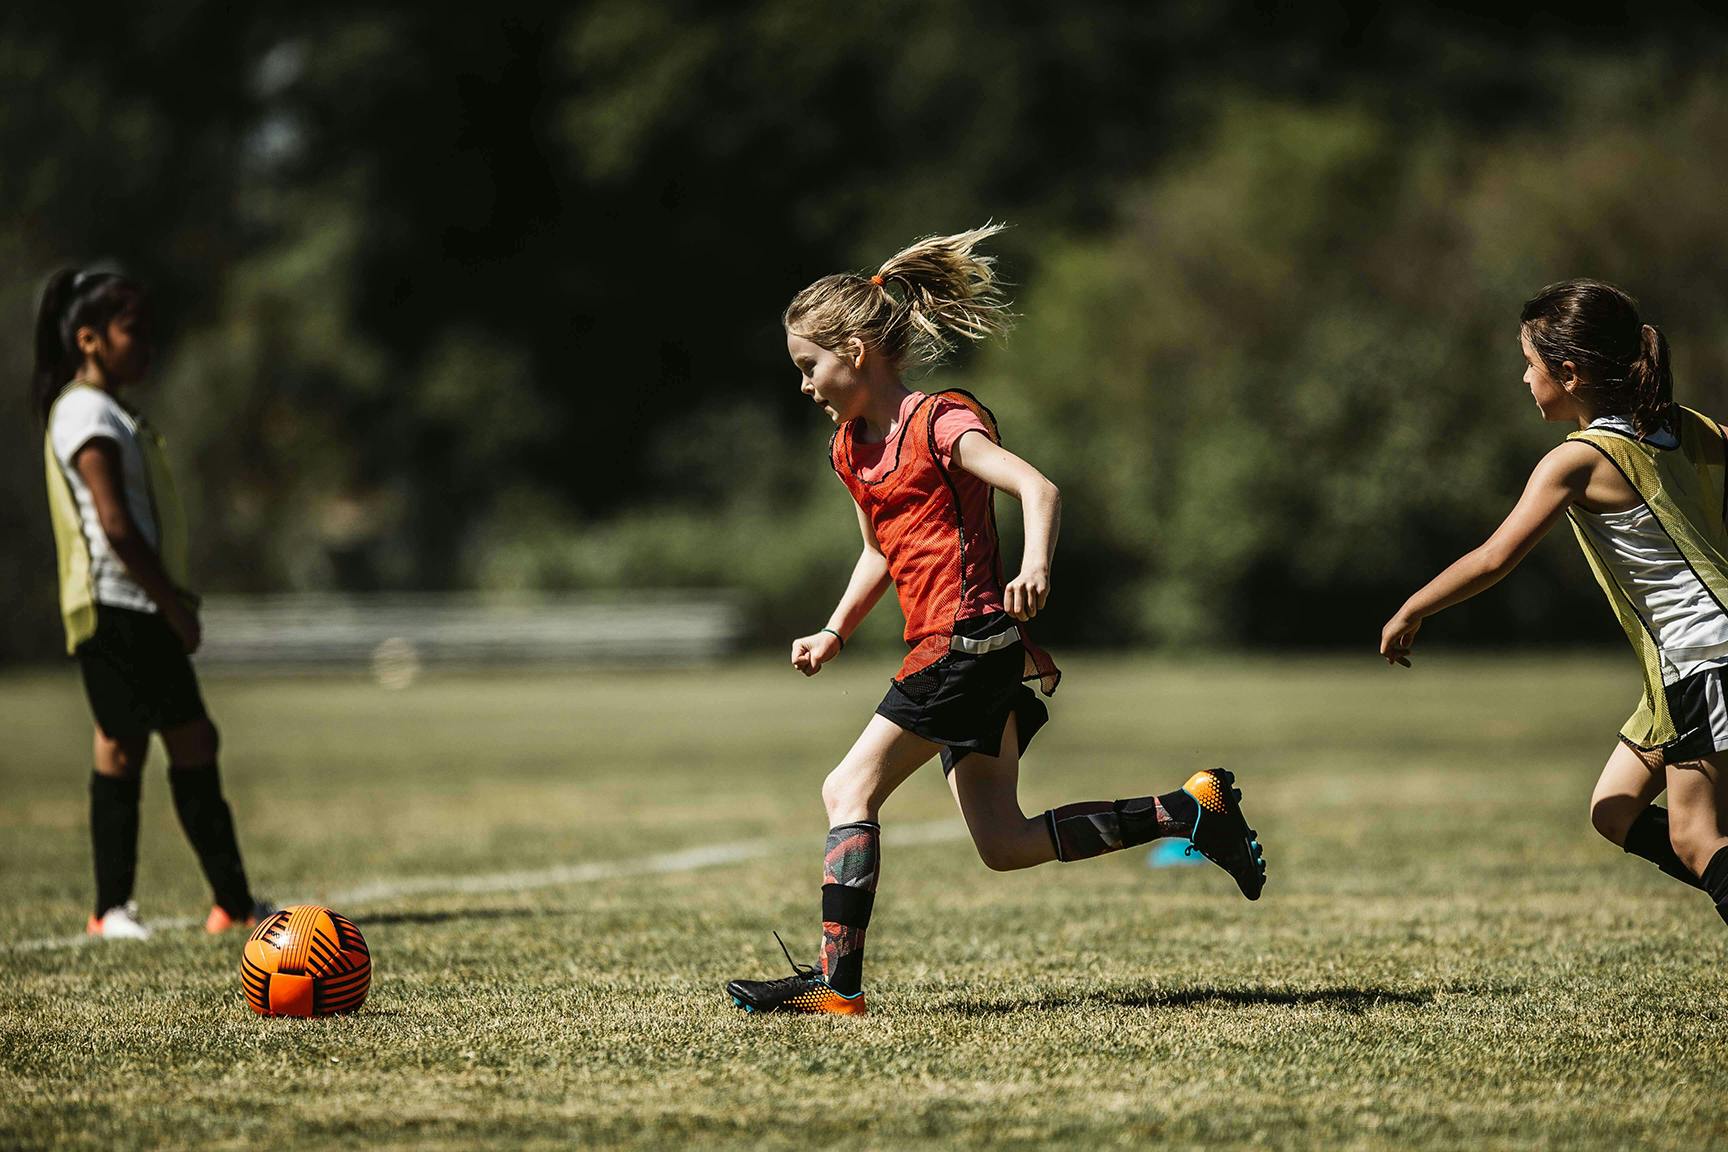 Girl in red jersey playing soccer